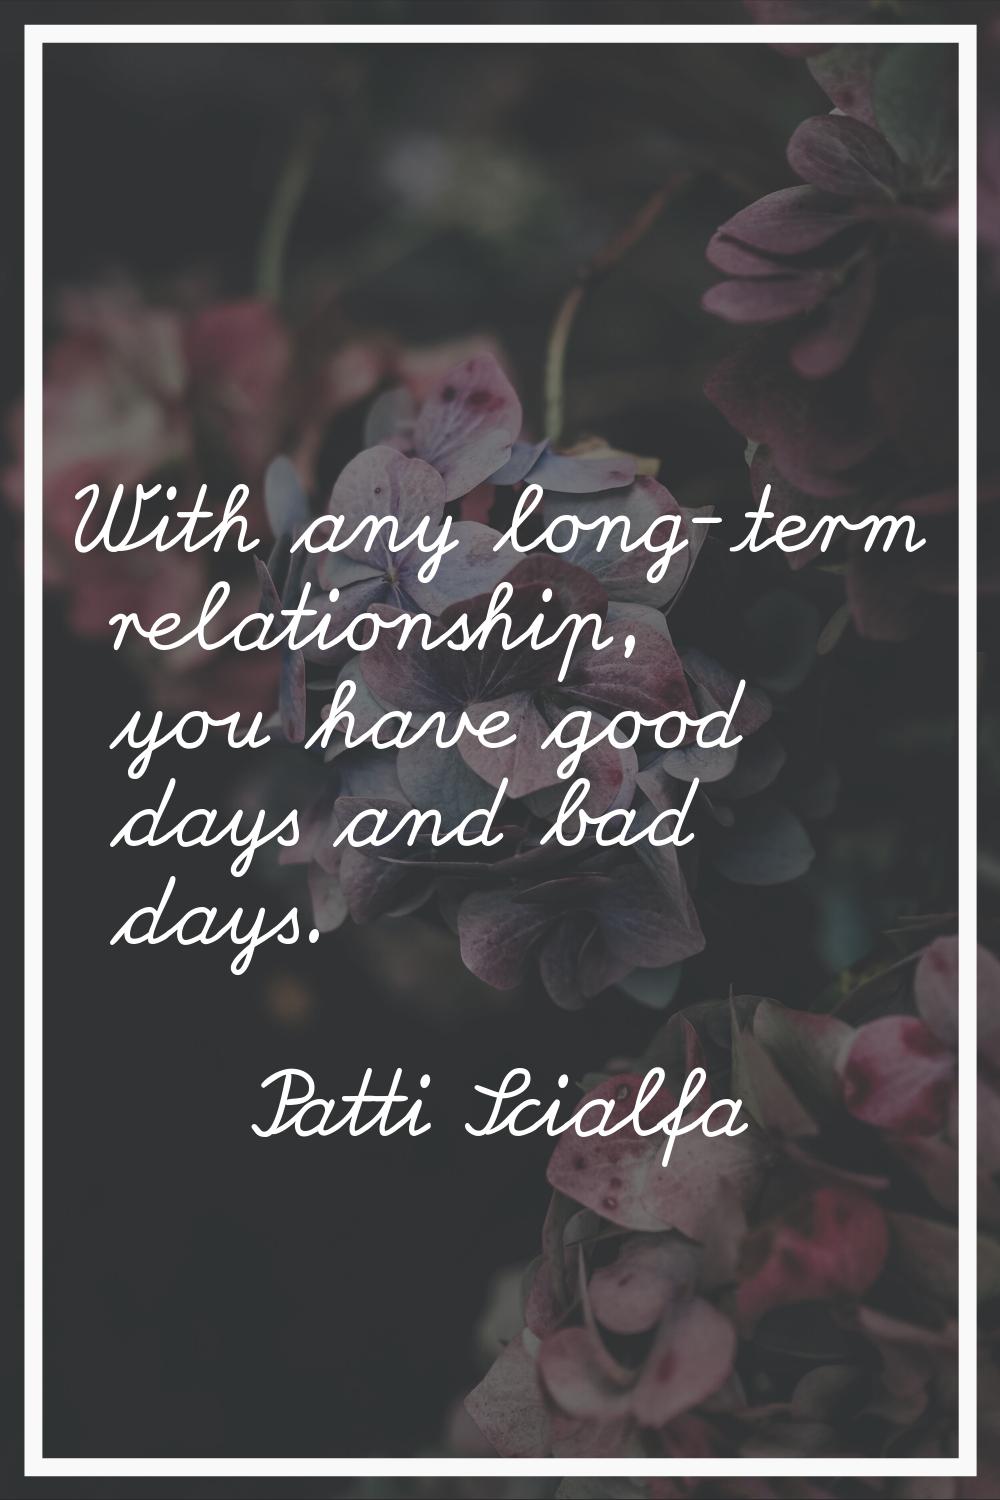 With any long-term relationship, you have good days and bad days.